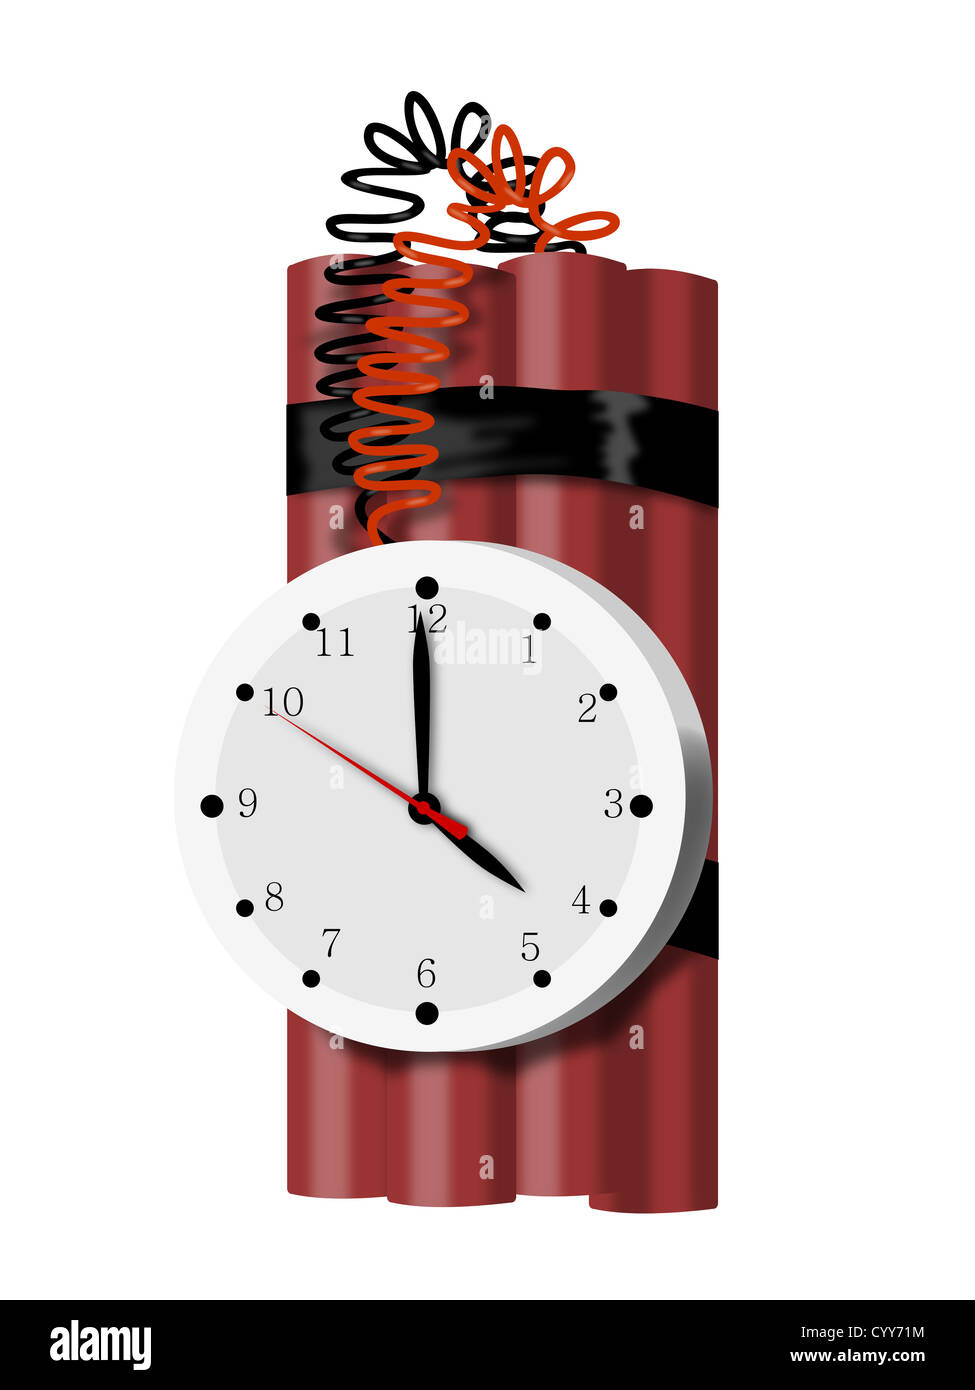 Tnt time bomb timebomb with clock Royalty Free Vector Image